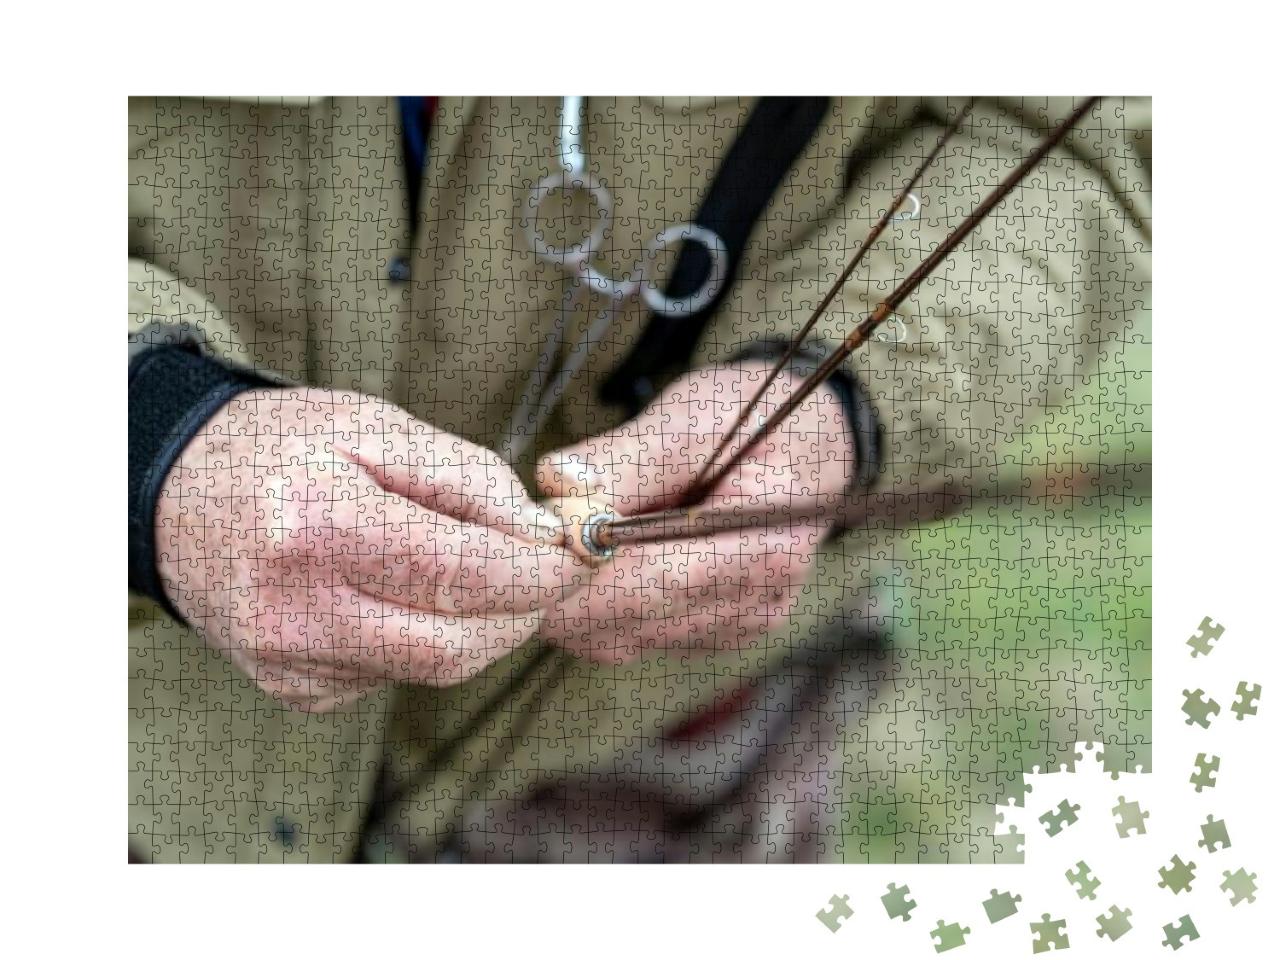 Close-Up of a Fisherman's Hand Adjusting Fly Fishing Rods... Jigsaw Puzzle with 1000 pieces